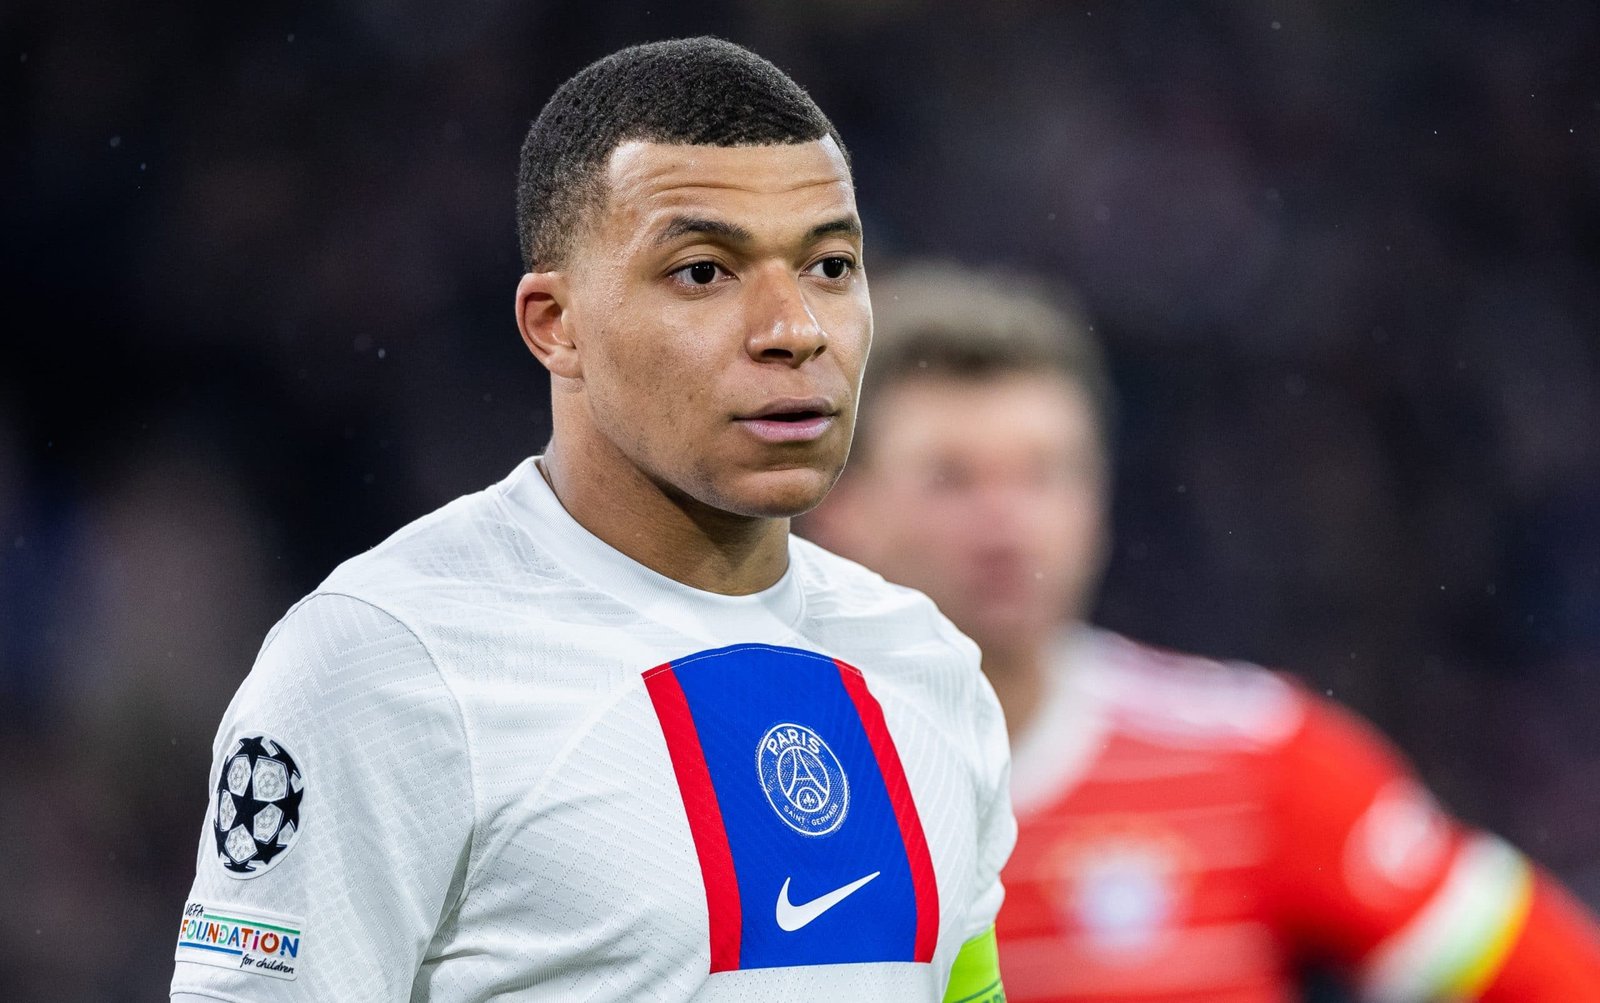 Kylian Mbappe Breaks Silence On Future After UCL Exit